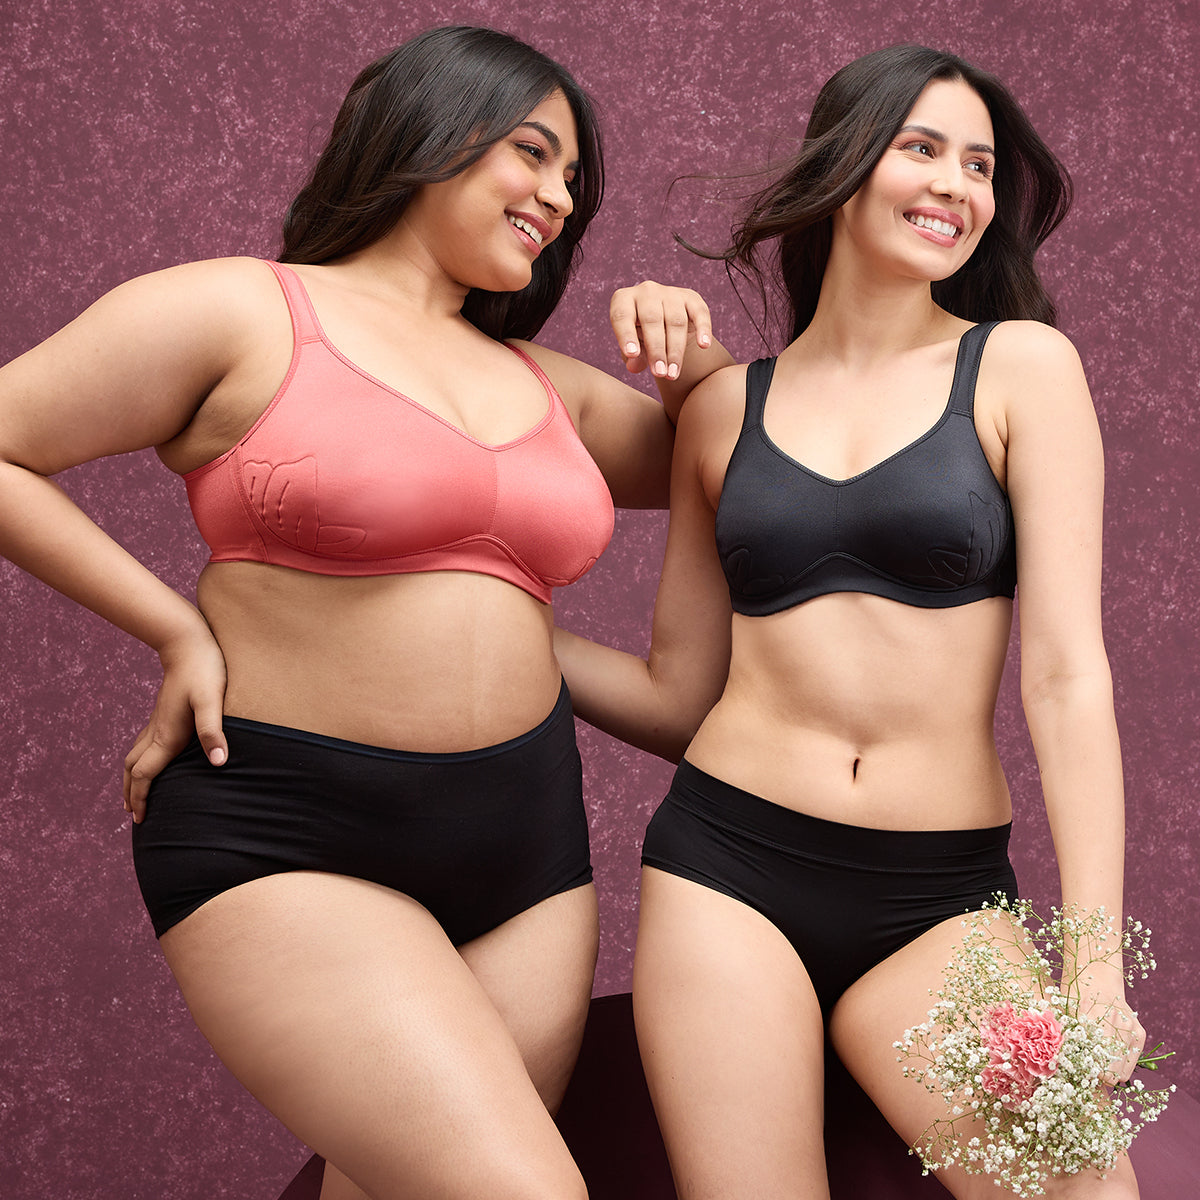 Buy Nykd by Nykaa Barely There Bra - Nyb225 - Black online